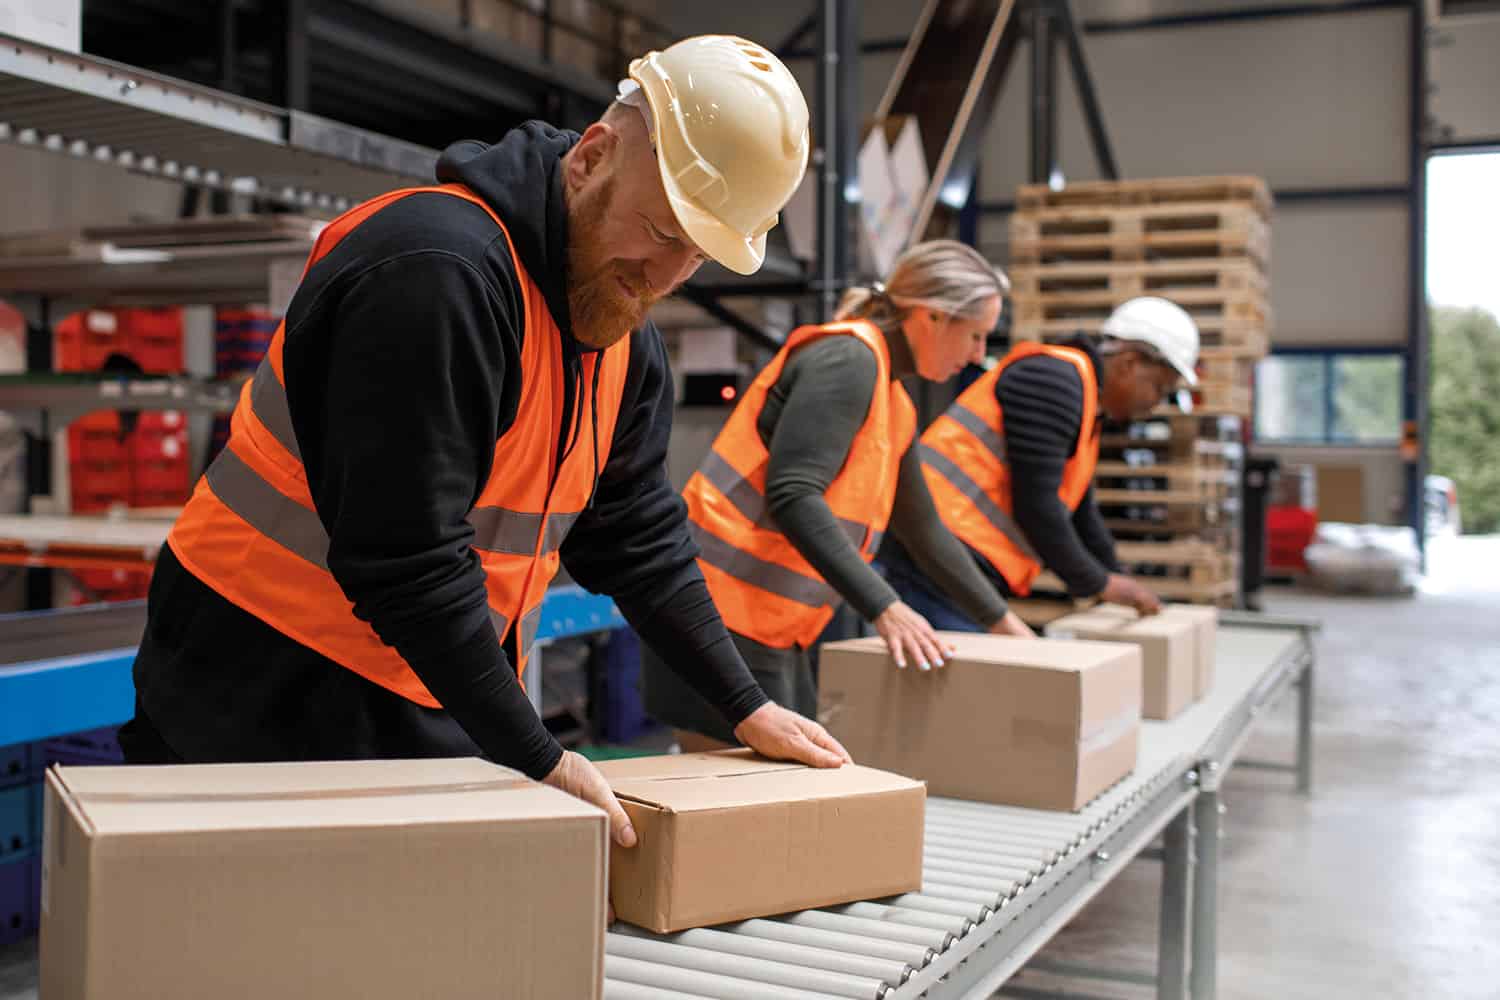 : three people in high-vis jackets checking parcels on a production line